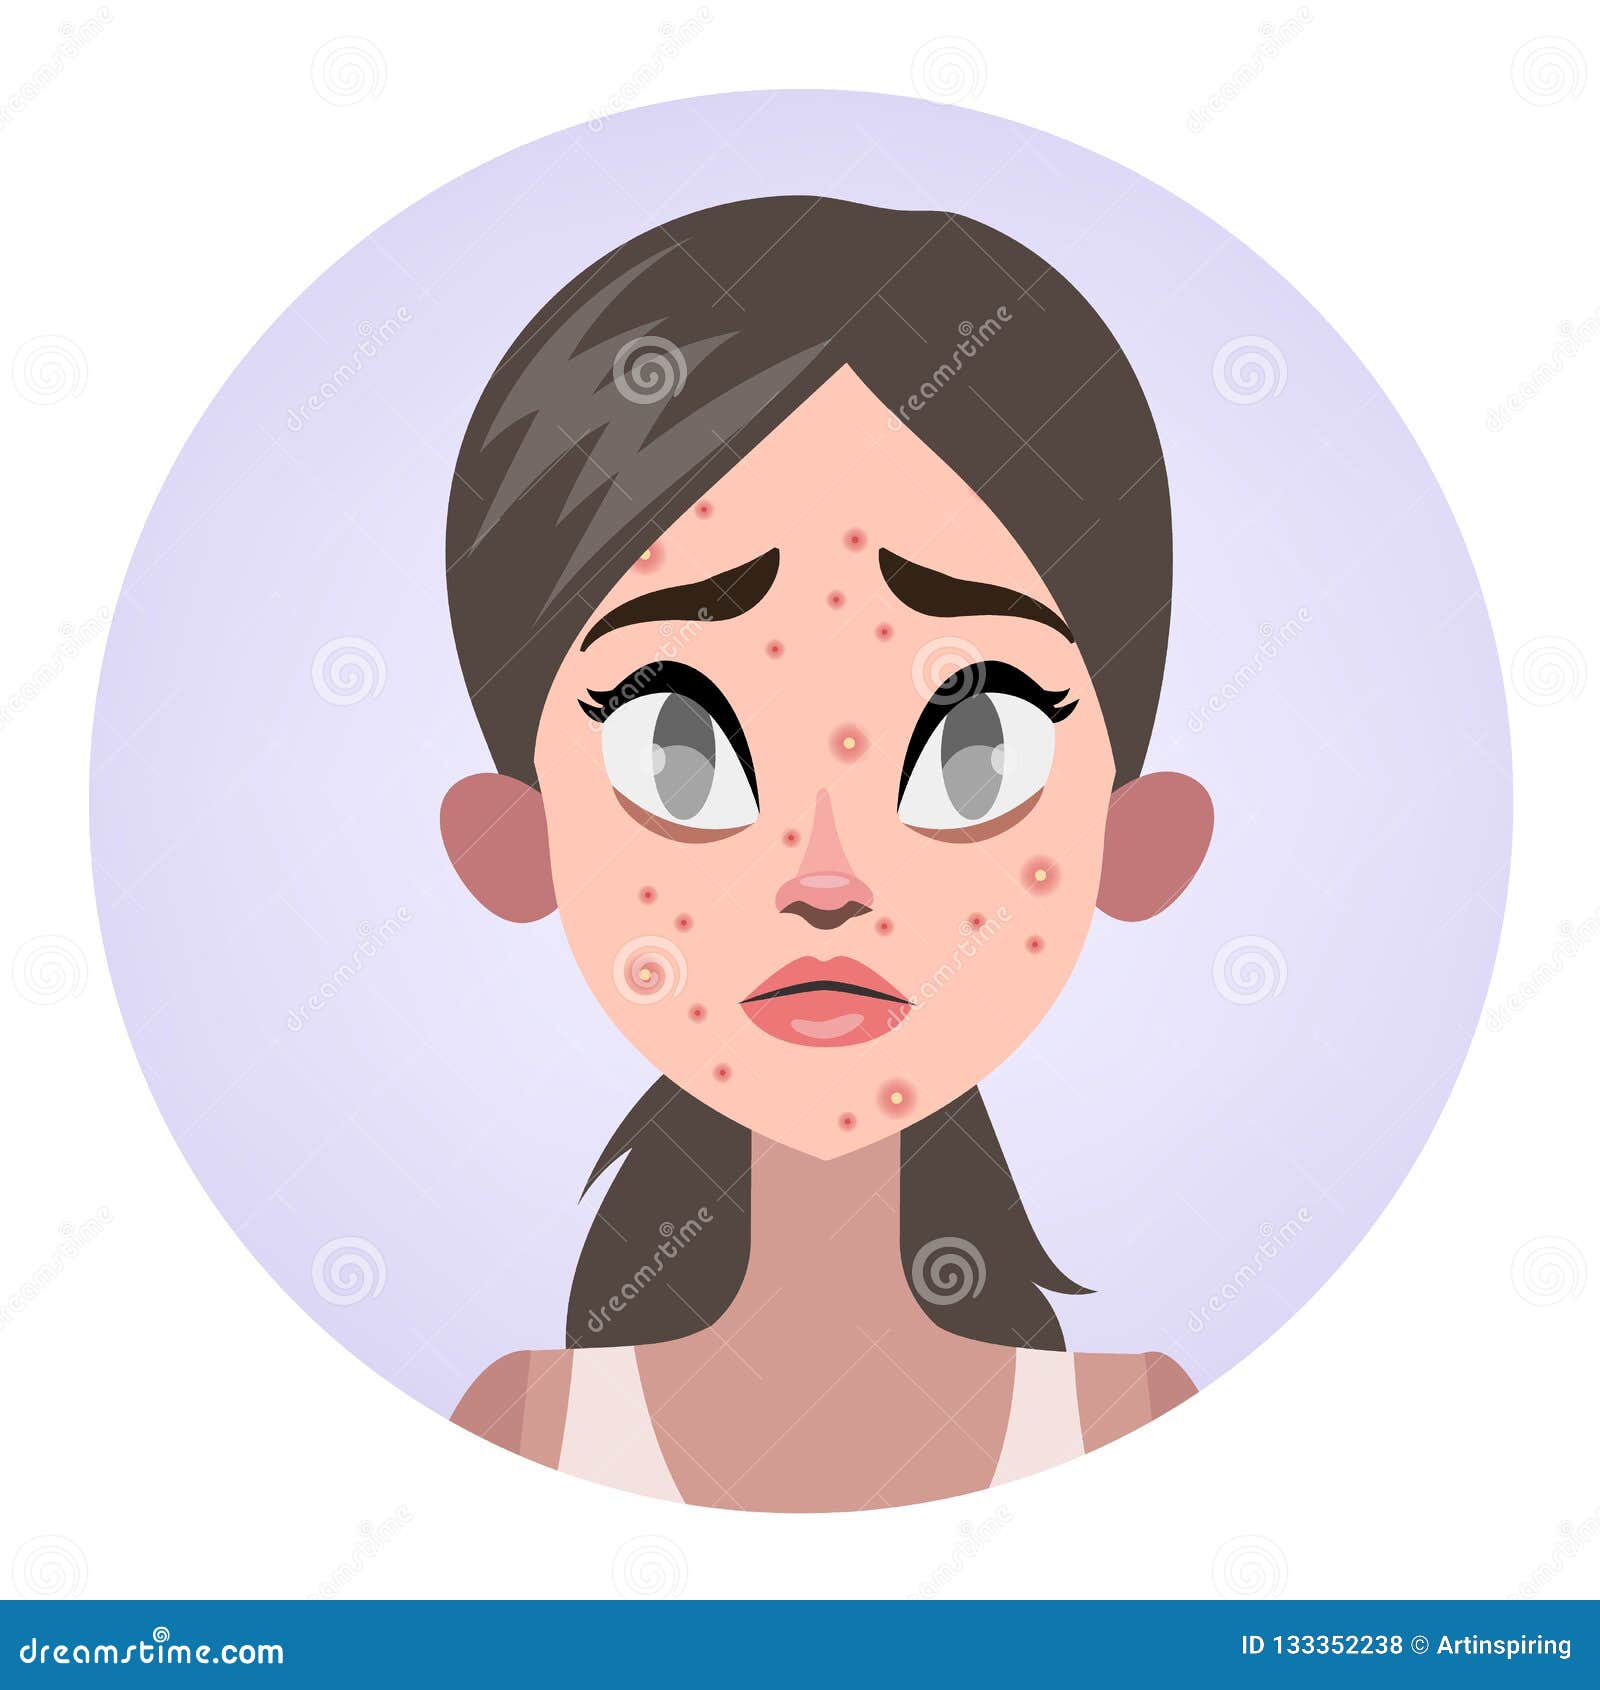  Acne  Cartoons  Illustrations Vector Stock Images 3983 